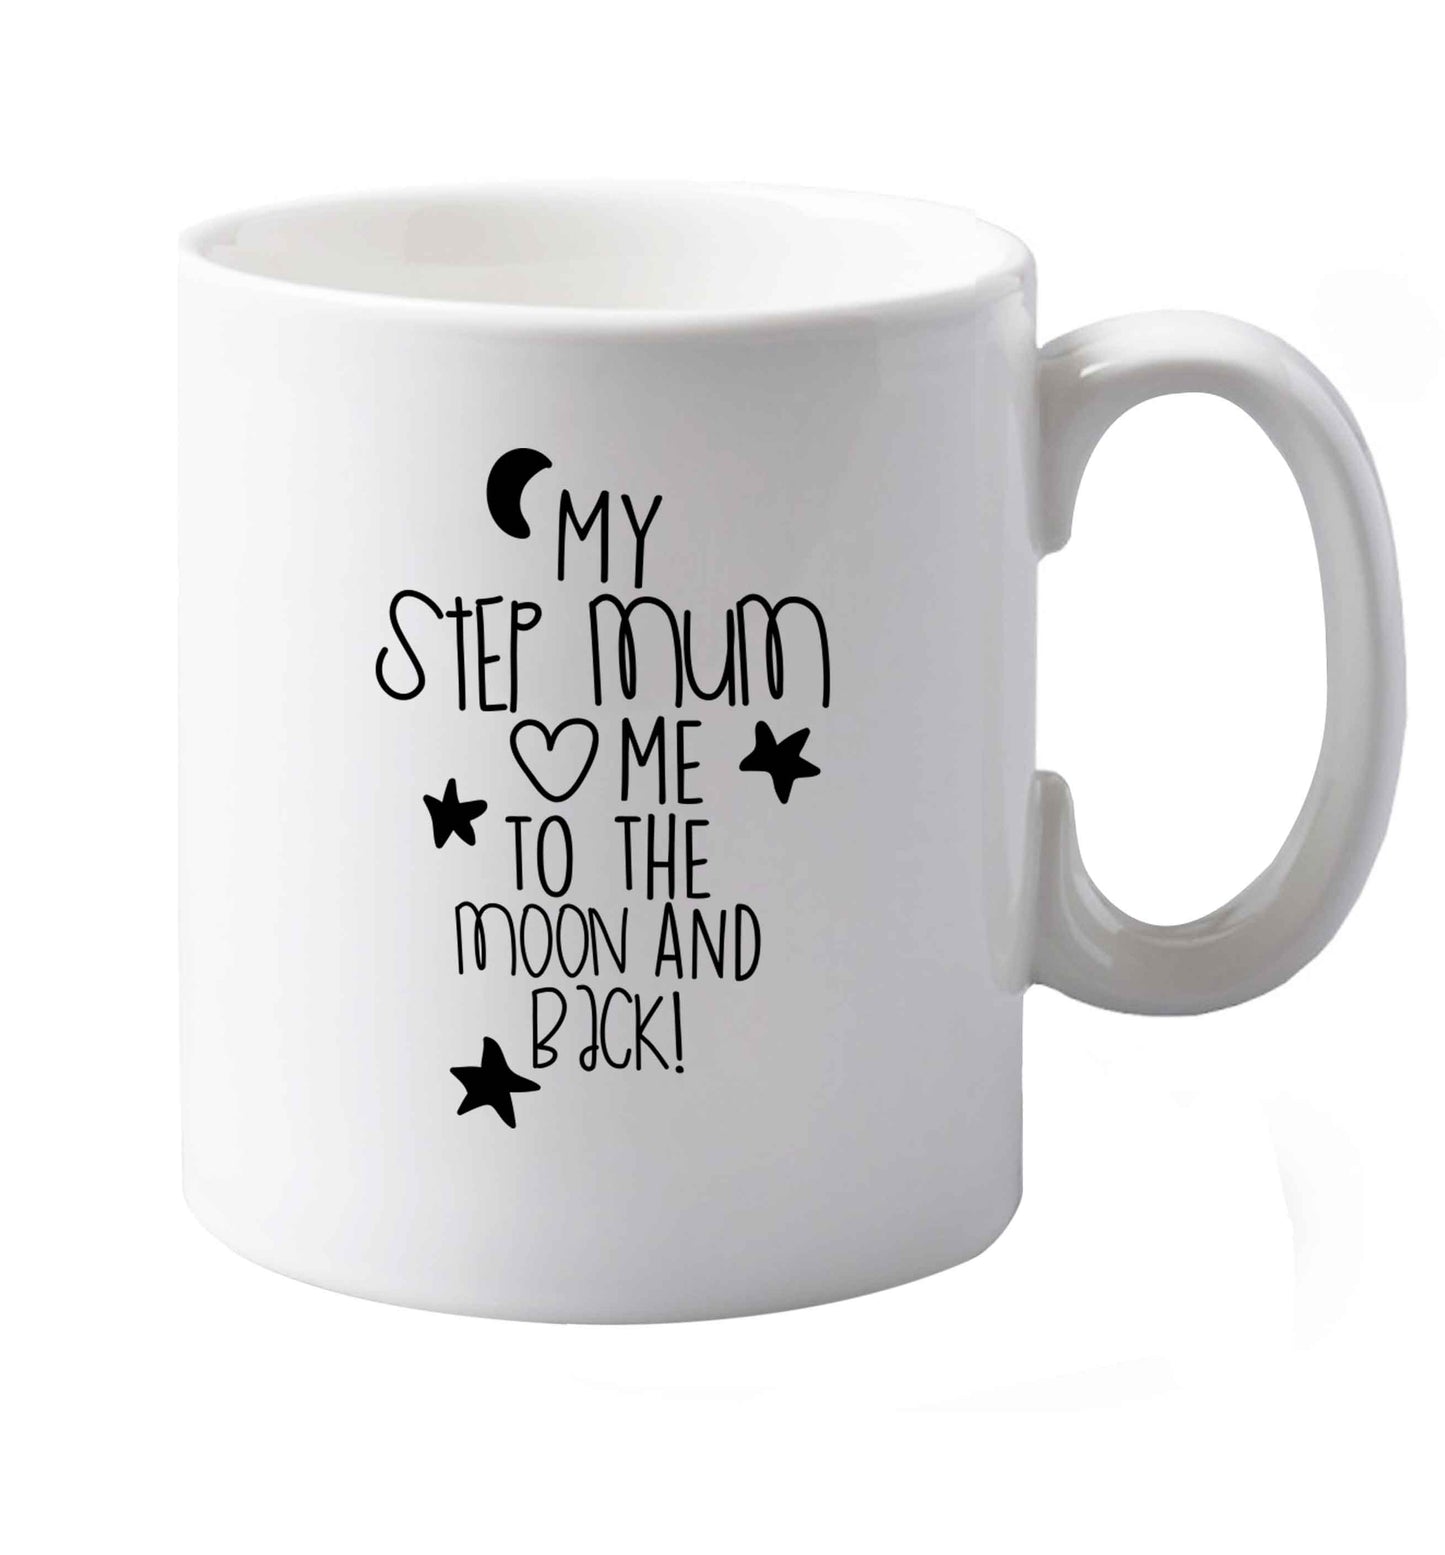 10 oz My step-mum loves me to the moon and back ceramic mug both sides